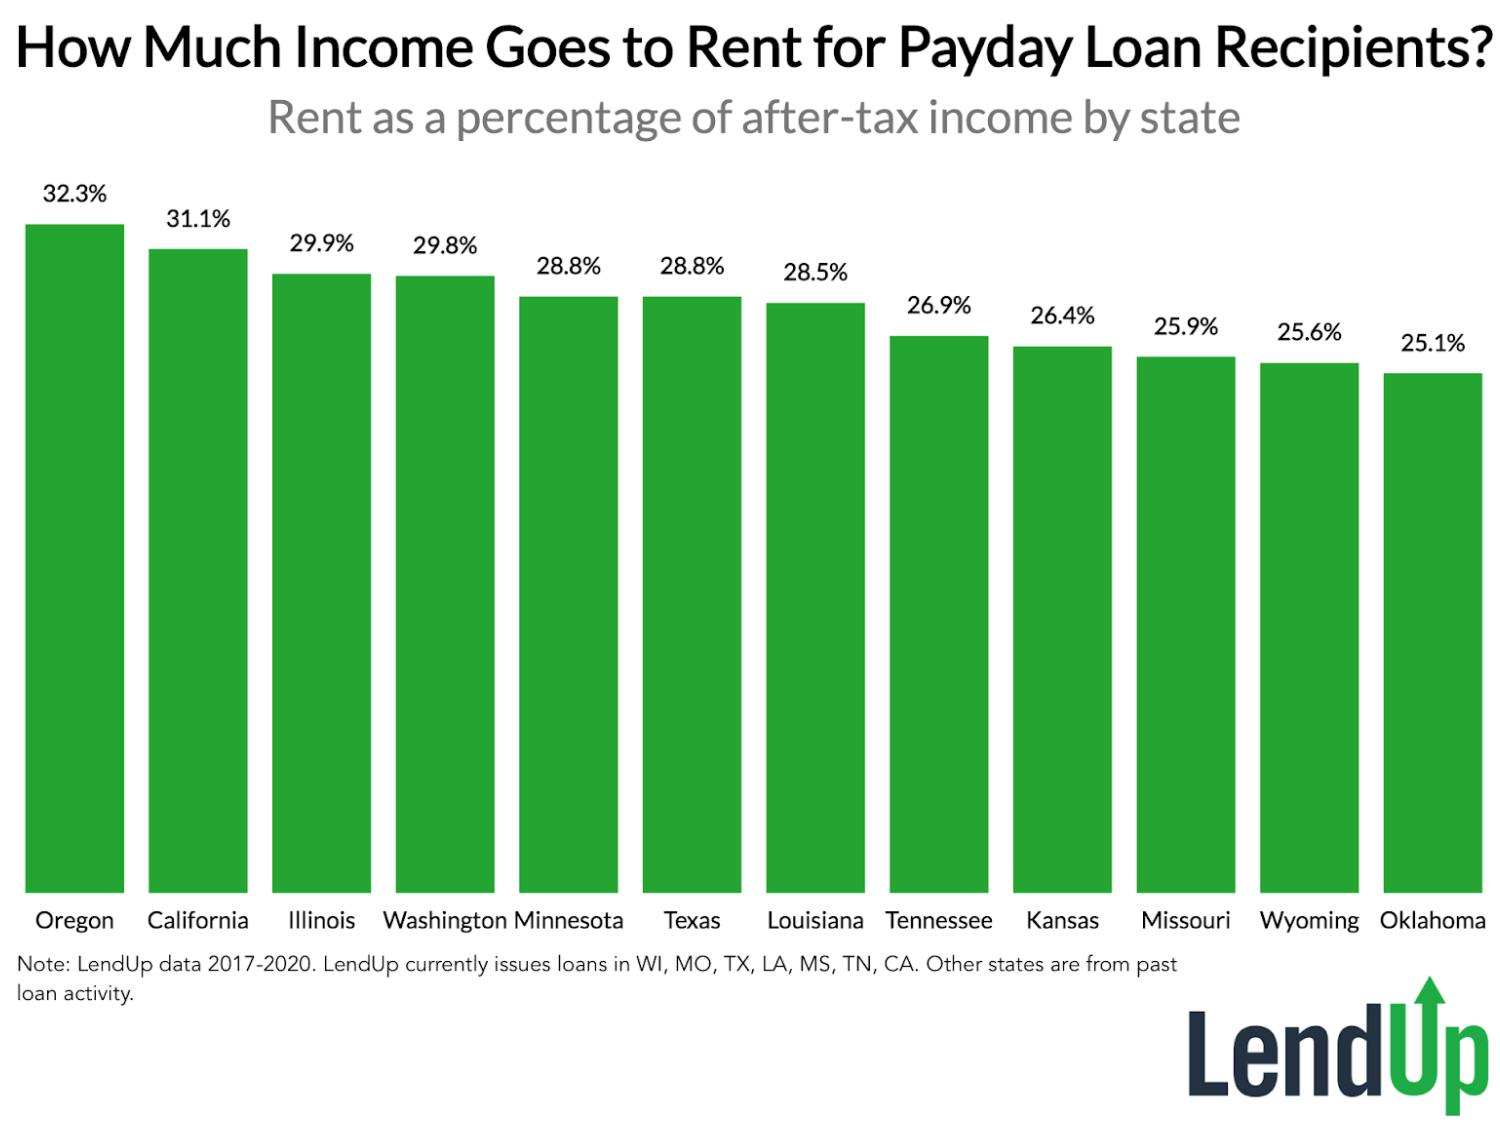 How Much Income Goes to Rent for Payday Loan Recipients?